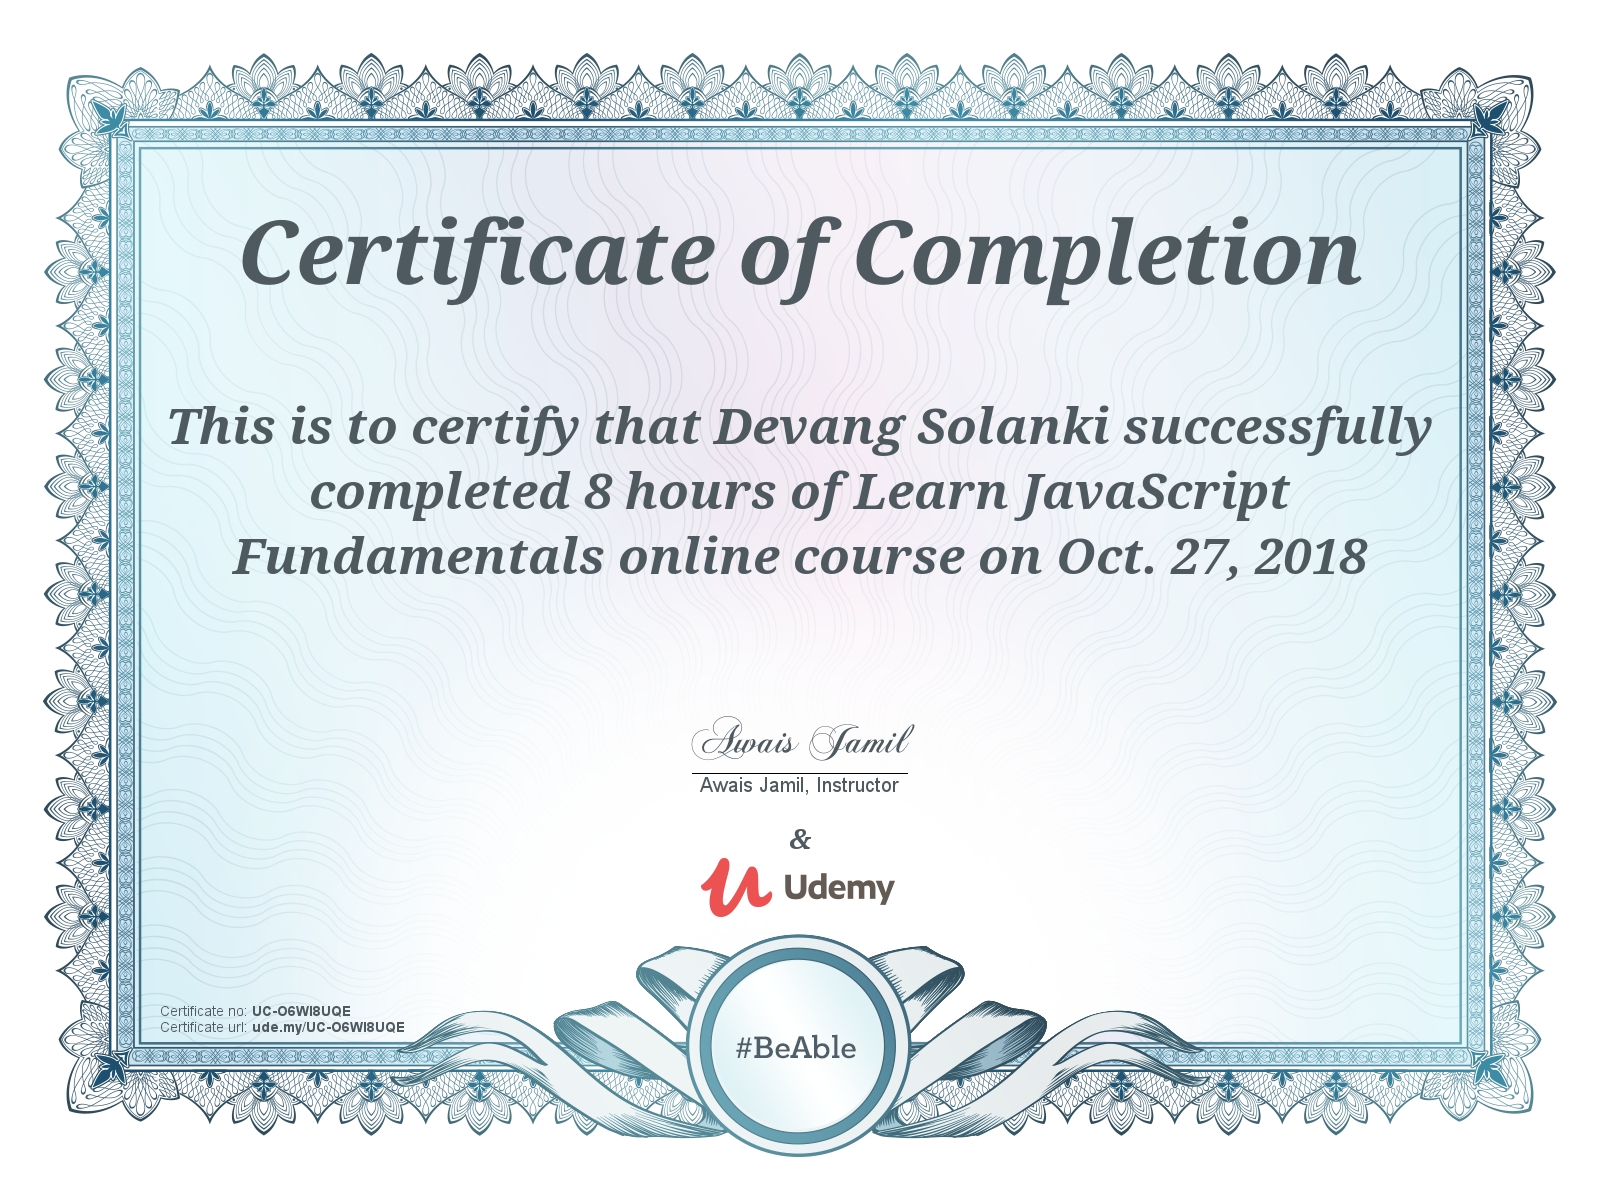 Devang Solanki Certify Completion of Learn JavaScript Fundamentals